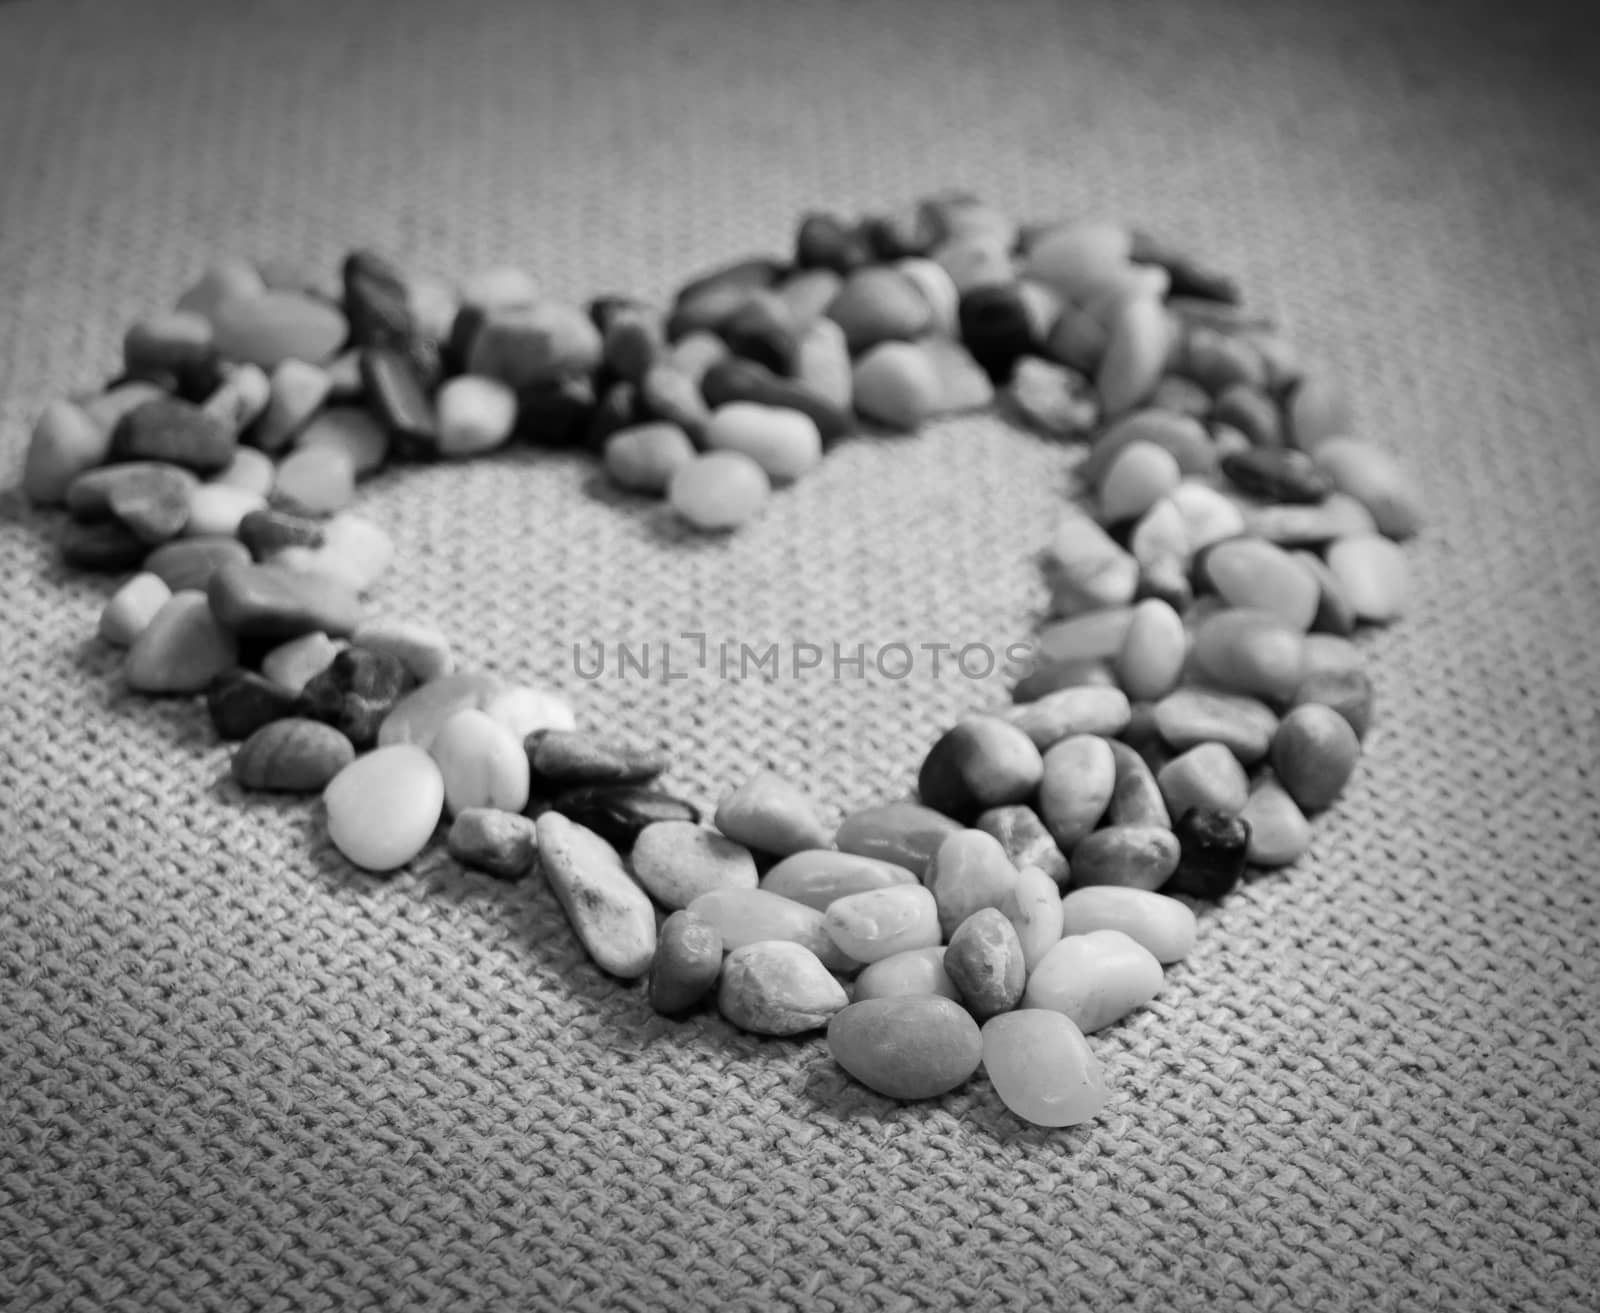 Small stones in the heart shape. The picture is black and white.